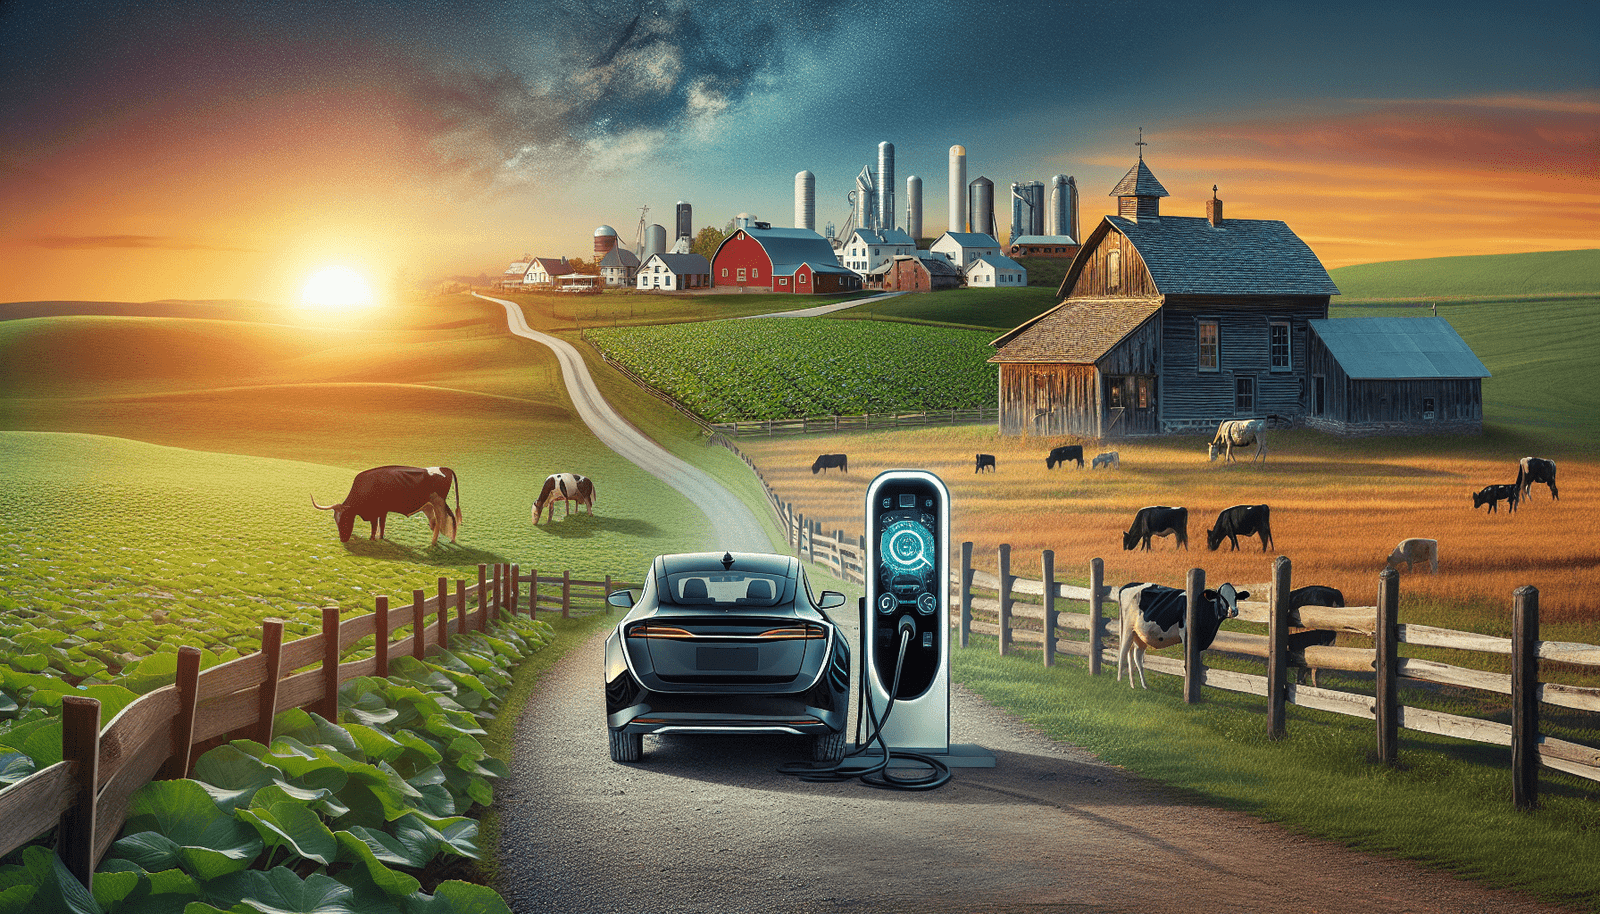 How Do Government Policies Encourage EV Adoption In Rural Areas?